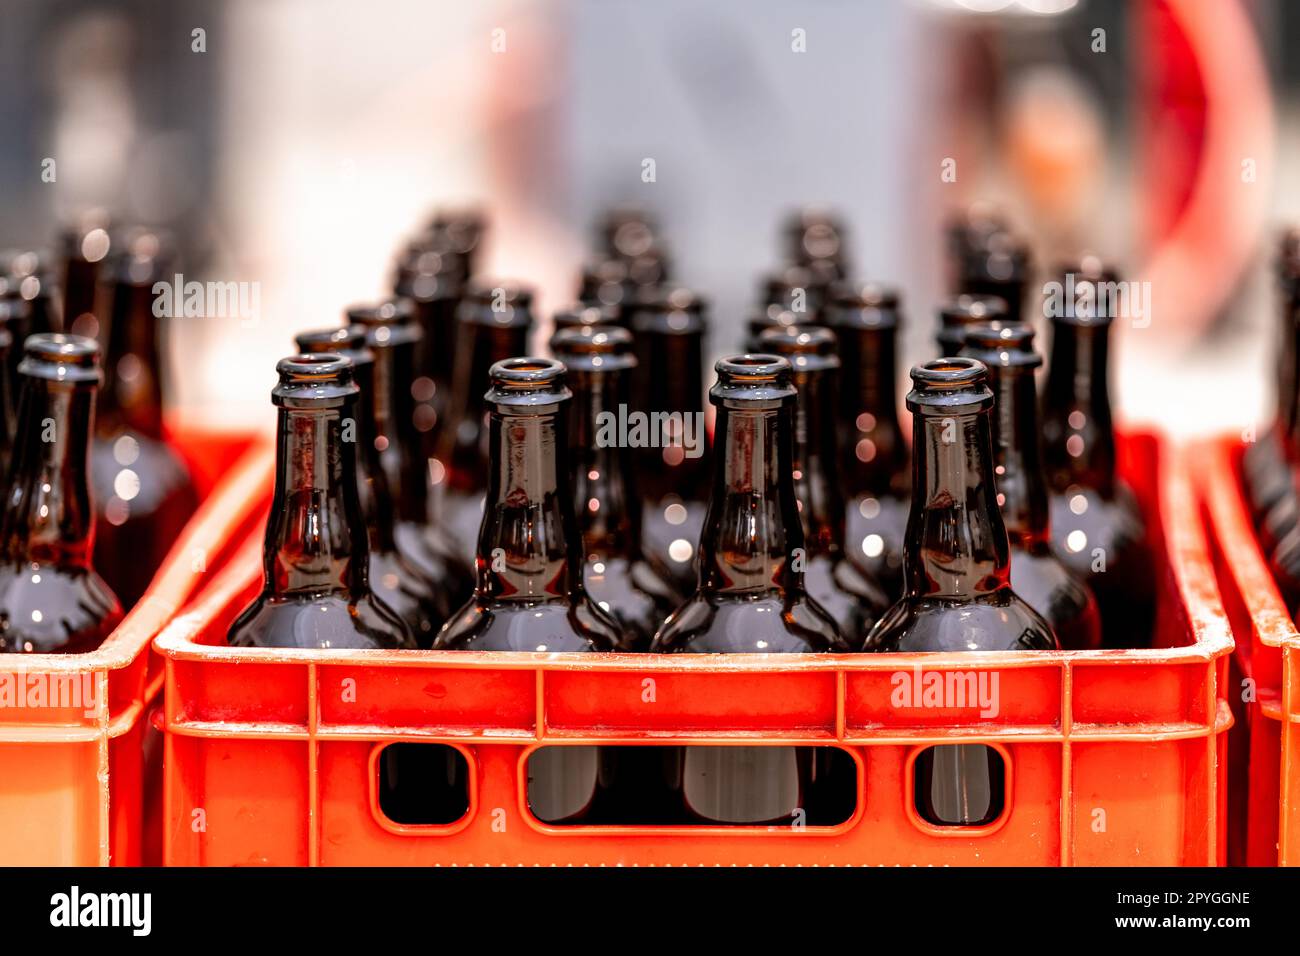 drink bottles in crates in storage Stock Photo